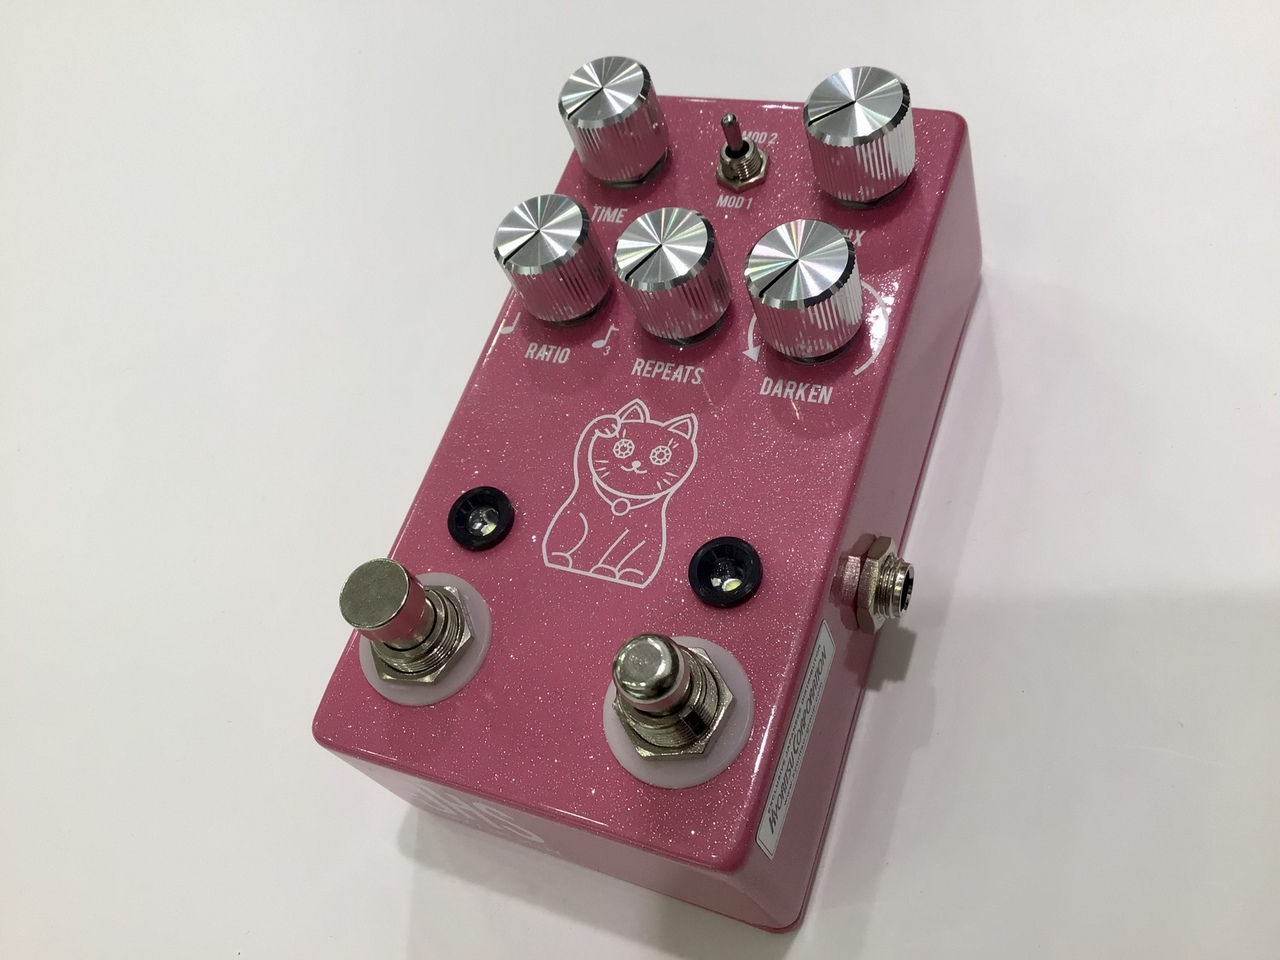 JHS pedal Lucky Cat Delay